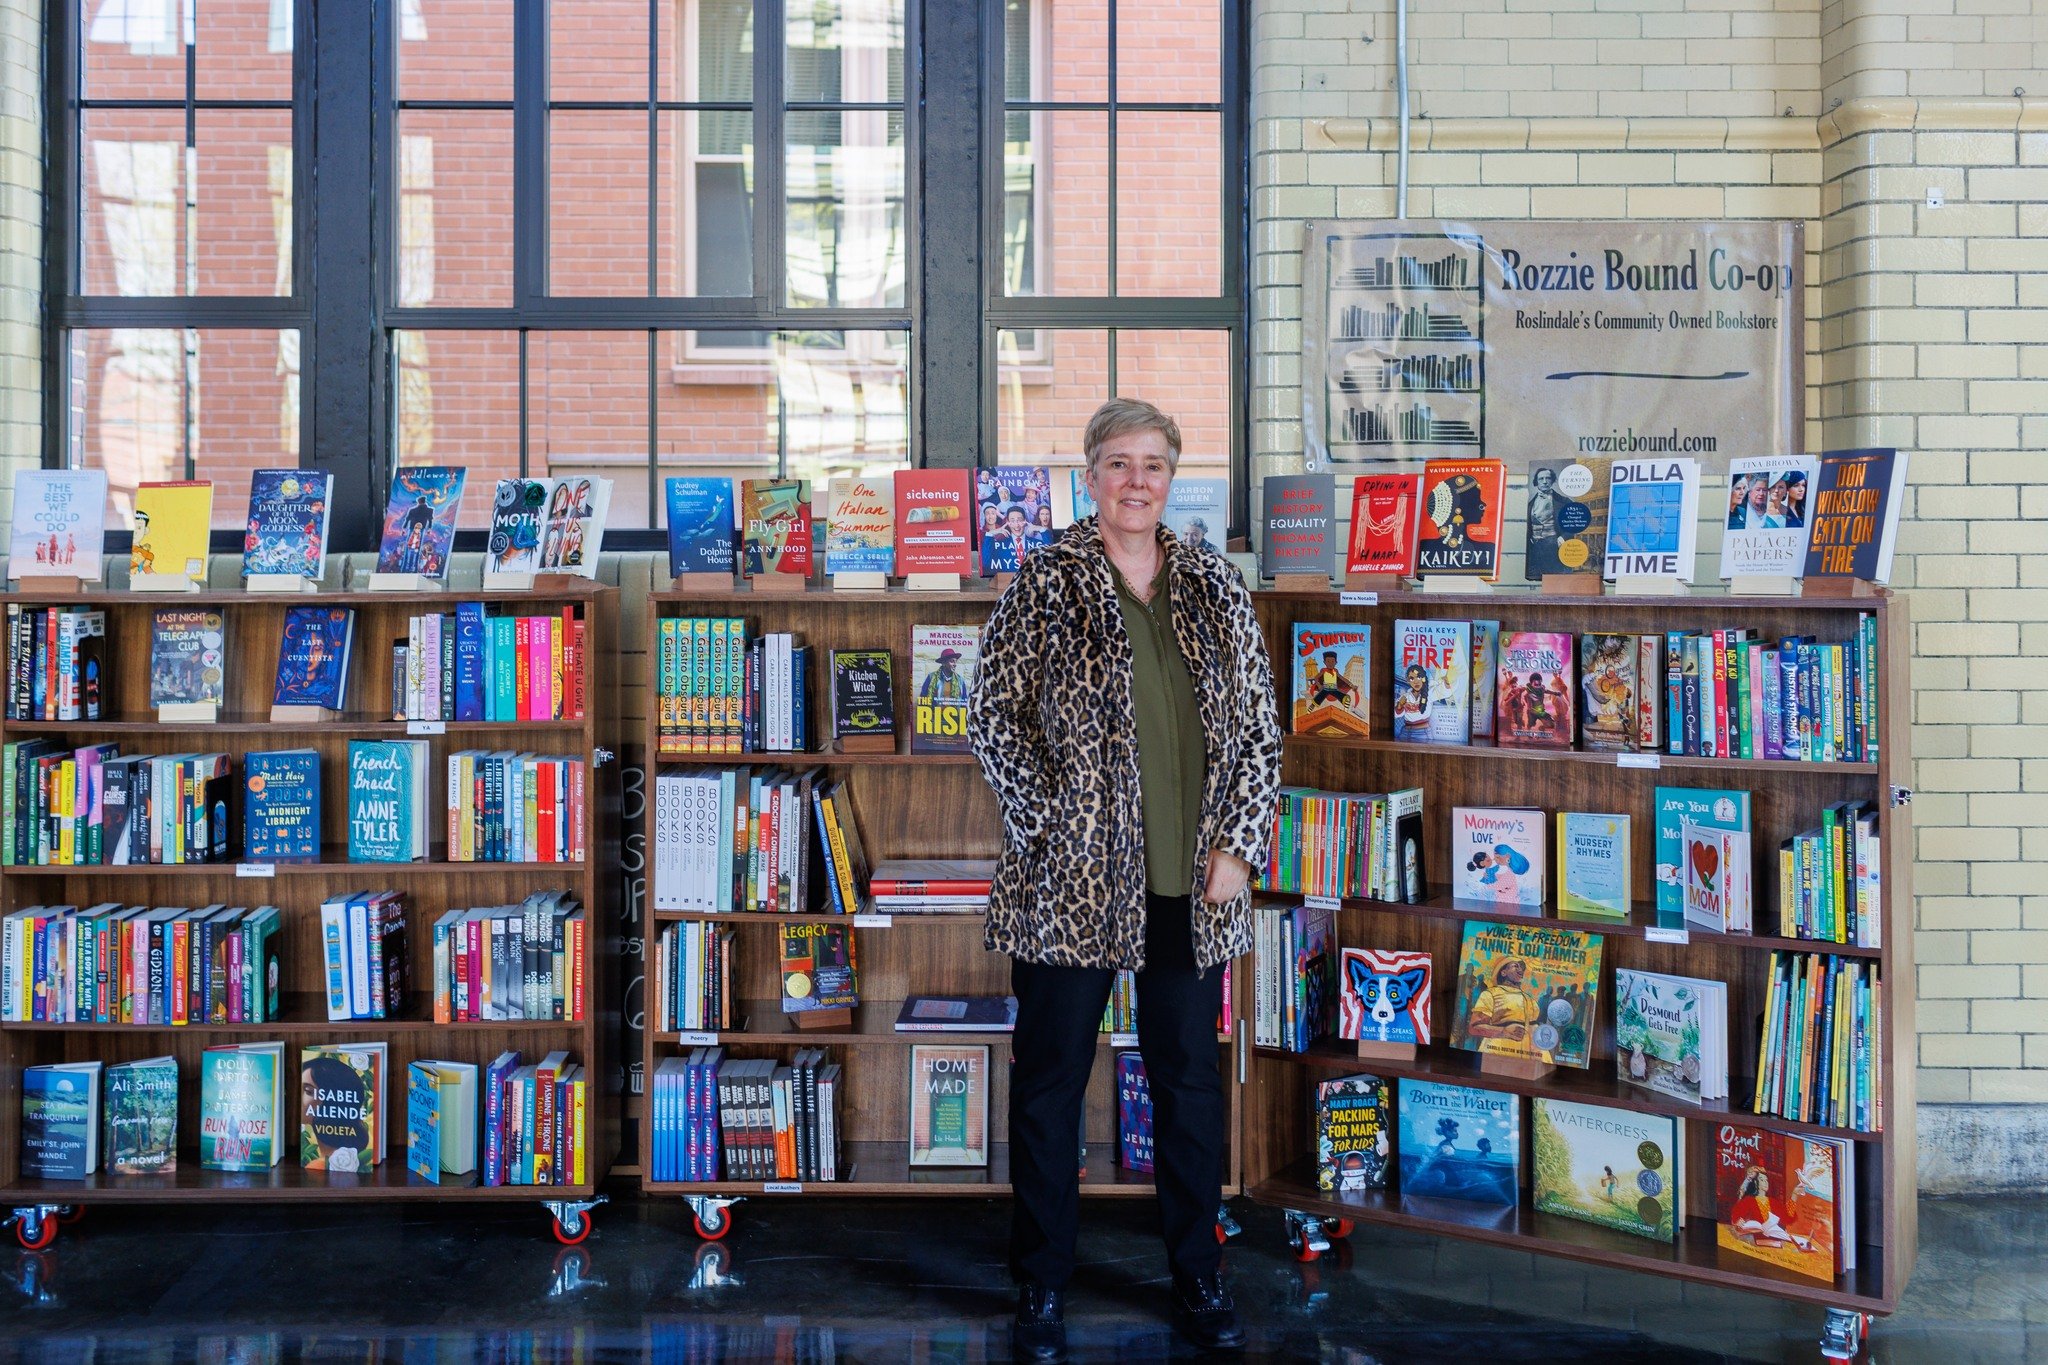 Did you know that @rozzieboundbooks first popped up at The Substation? Today is World Book Day, and we want to celebrate Rozzie Bound! We love our community bookstore and encourage you to check them out for their in-store selection and events, and th